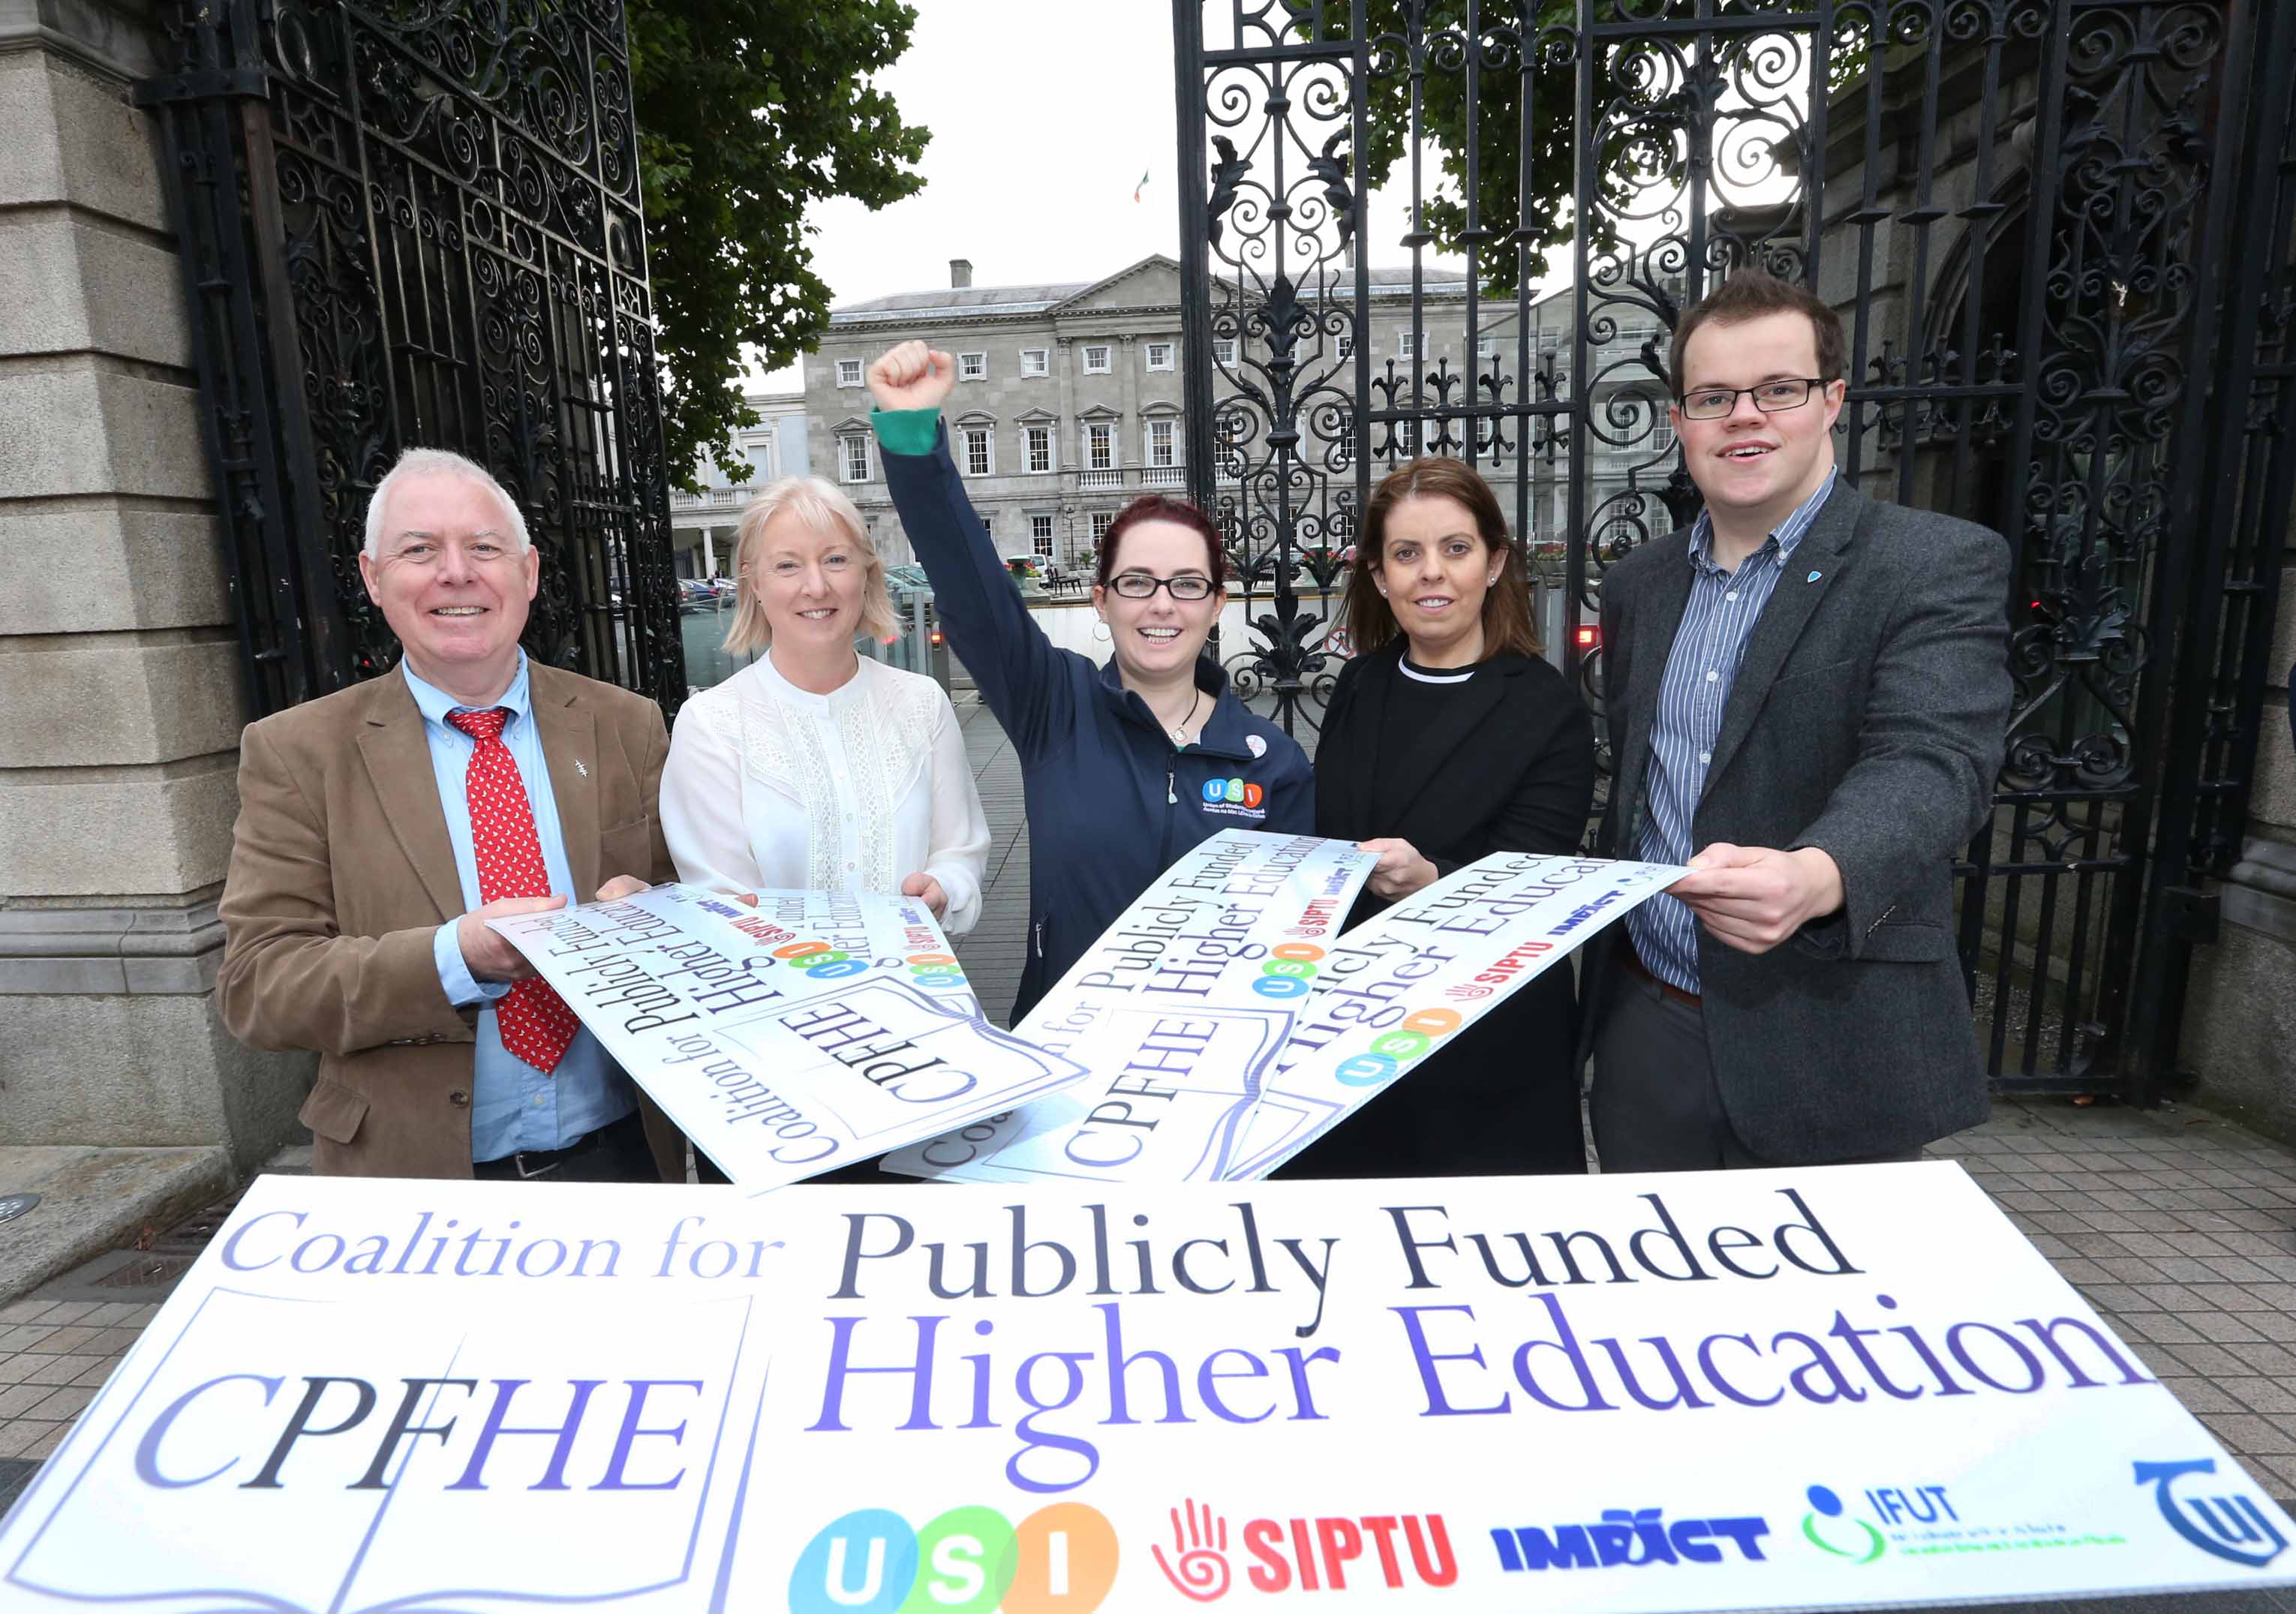 The Coalition for Publicly Funded Higher Education call for immediate governmental investment in third level education sector